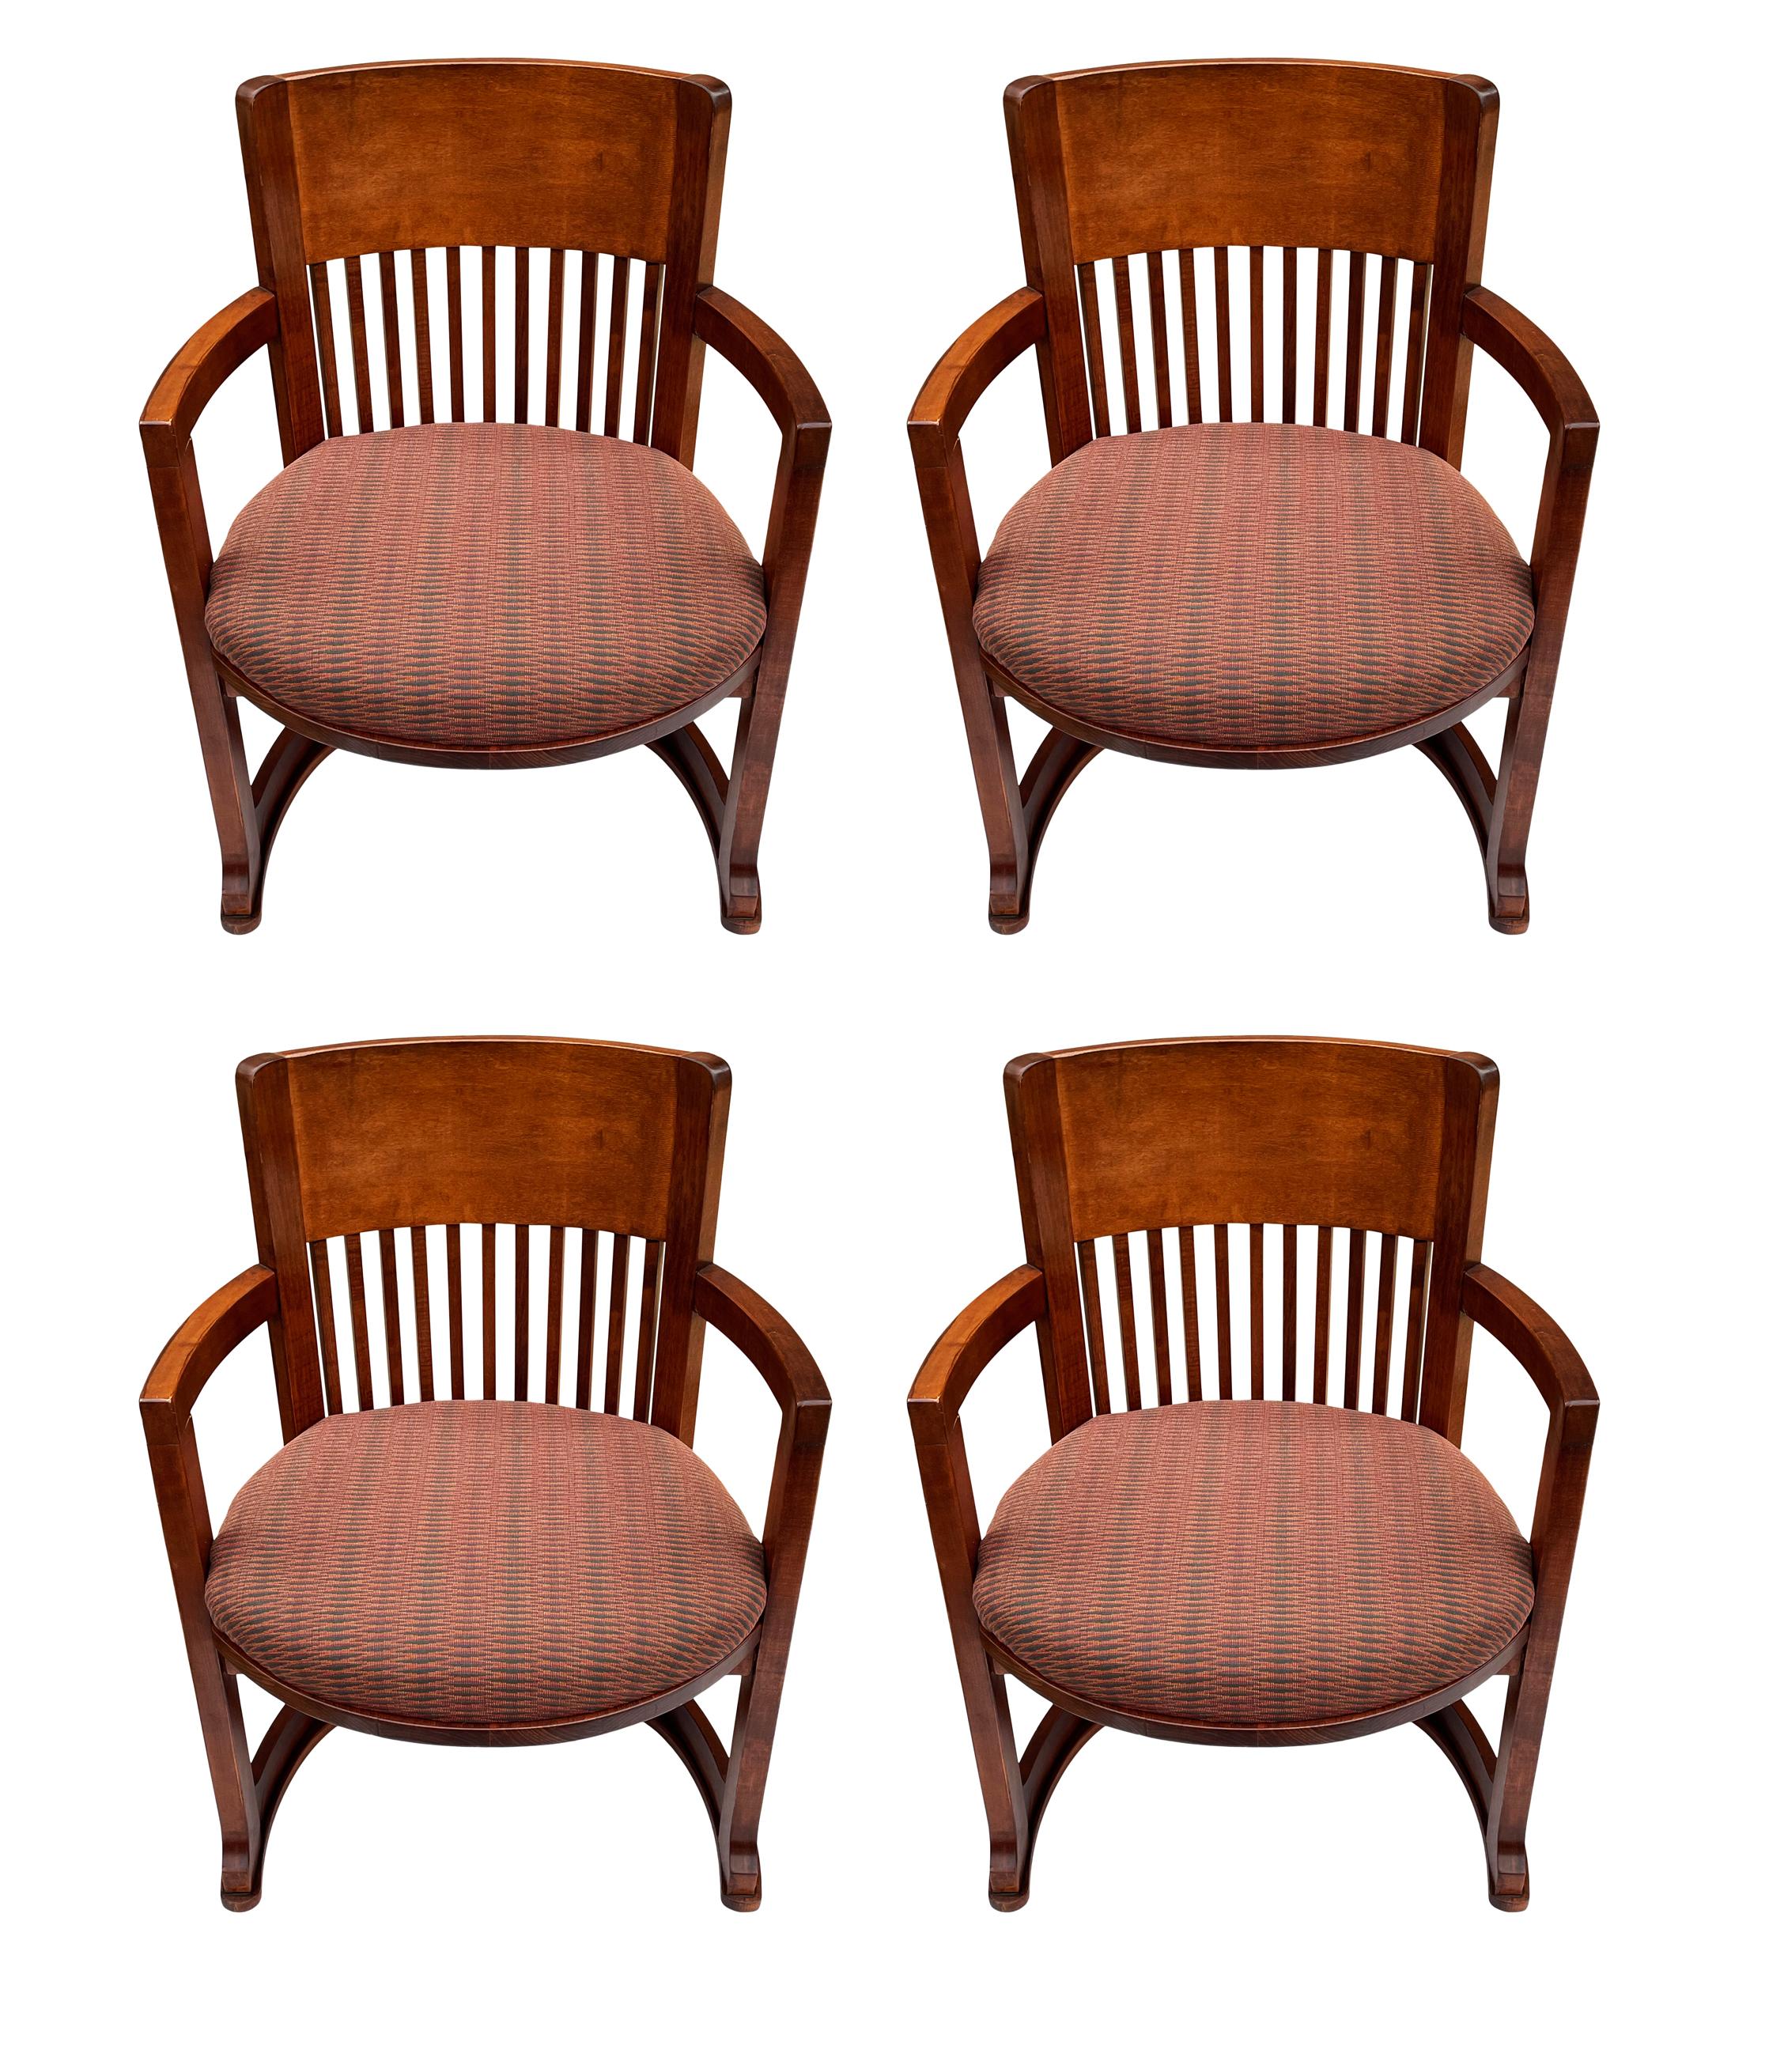 A complete set of four barrel back chairs after Frank Lloyd Wright. These feature solid wood construction with upholstered seat pads. Price includes set of four.